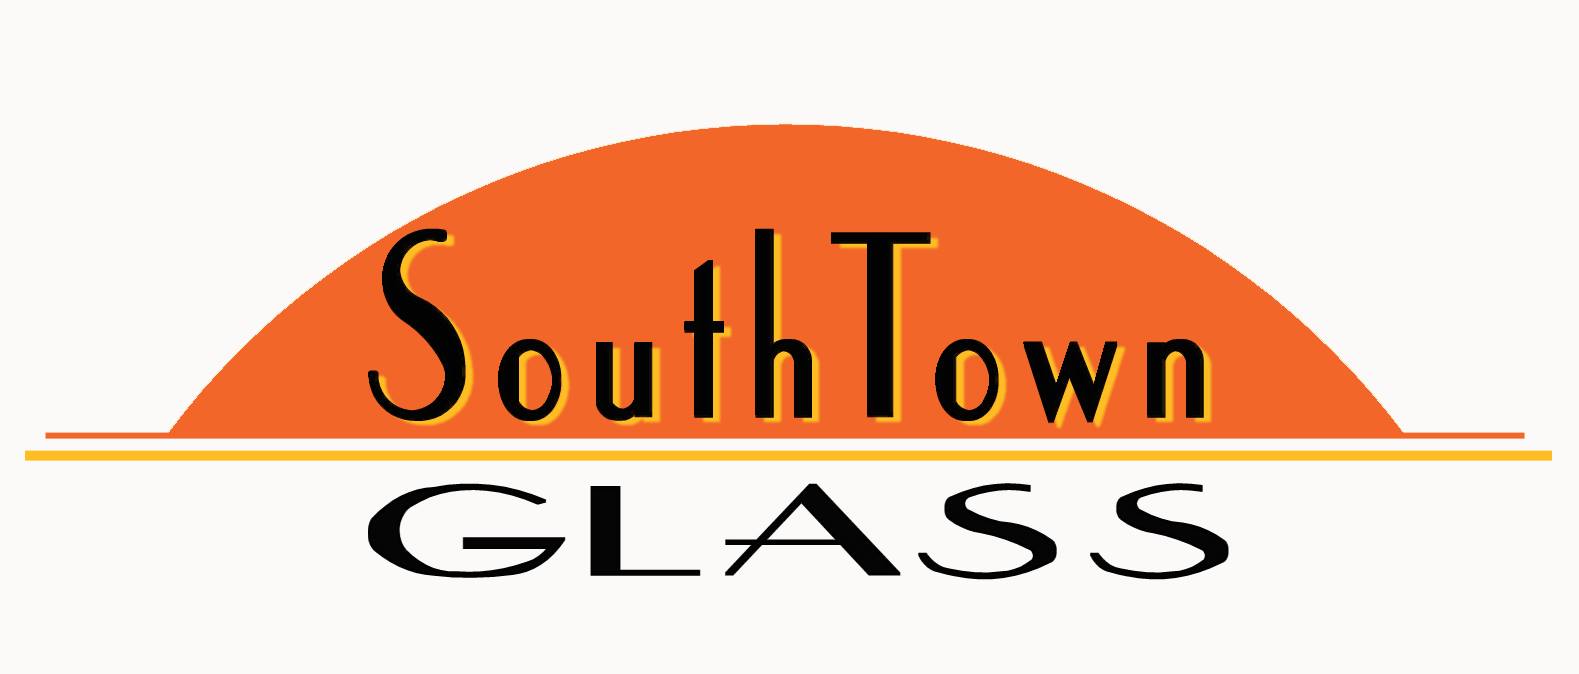 Company logo of South Town Glass